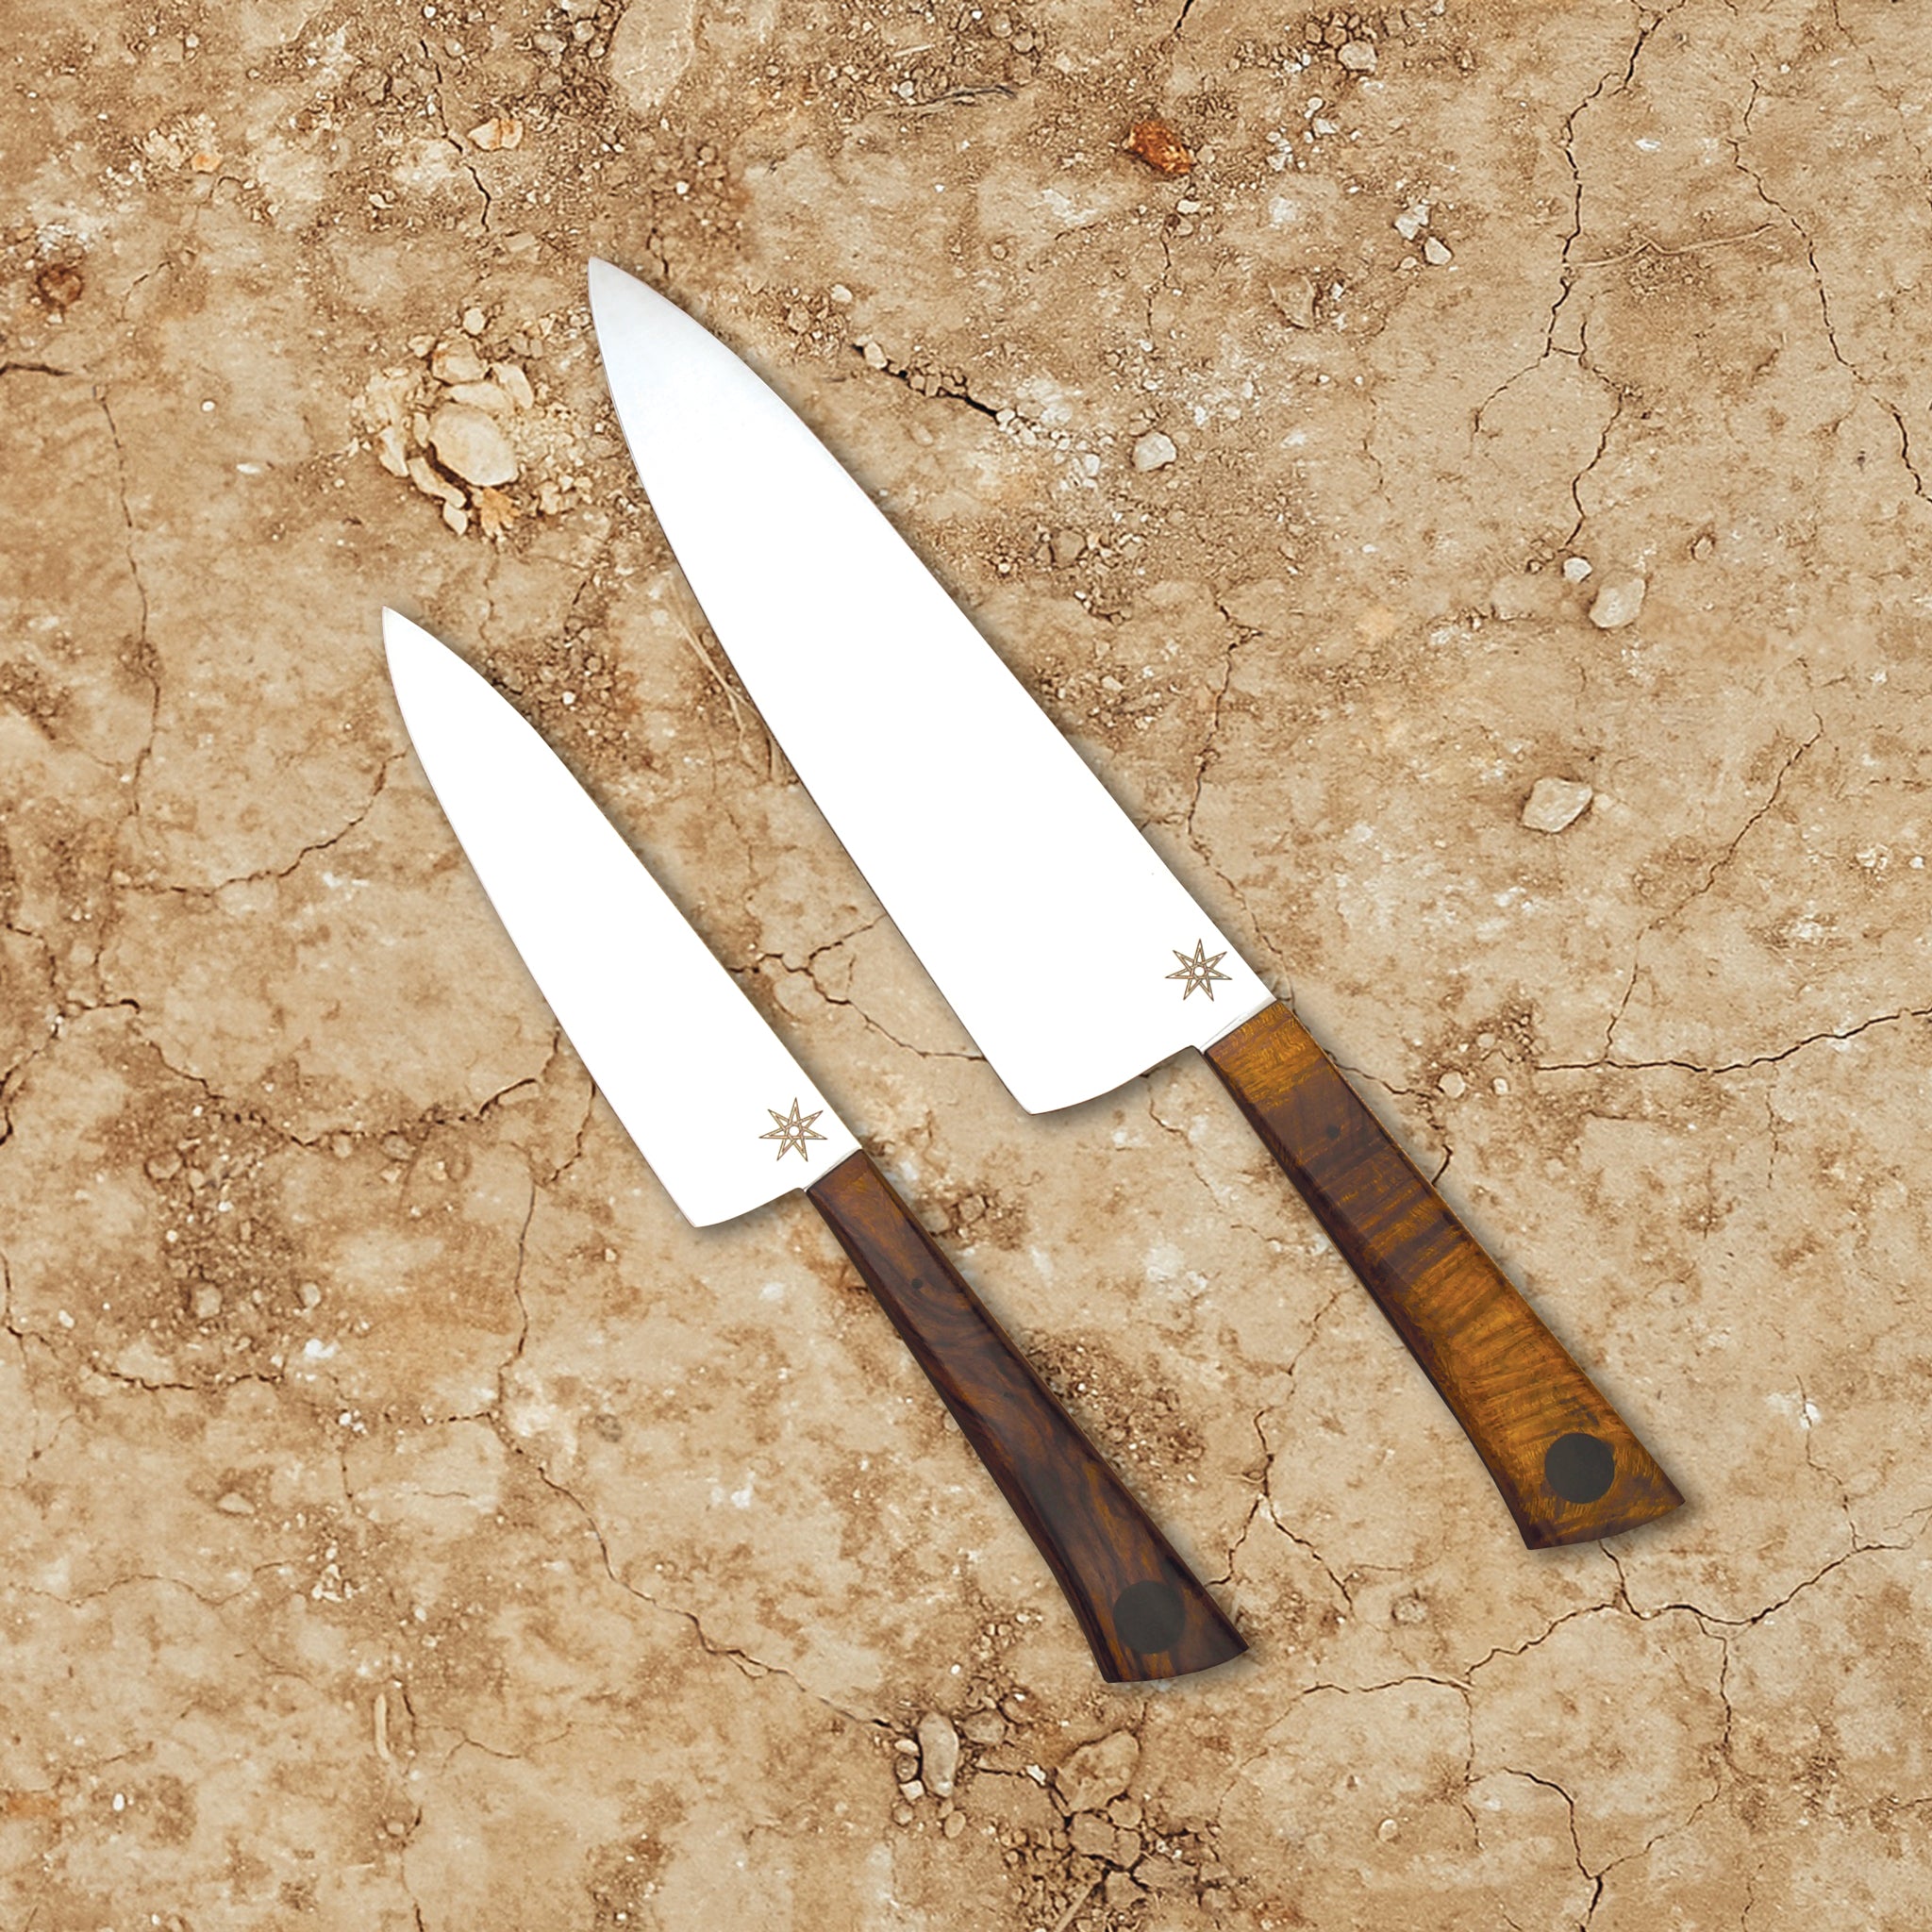 8.5" stainless steel Chef and 6" utility knives by Town Cutler featuring Olneya Desert Ironwood handle. Sold as set.